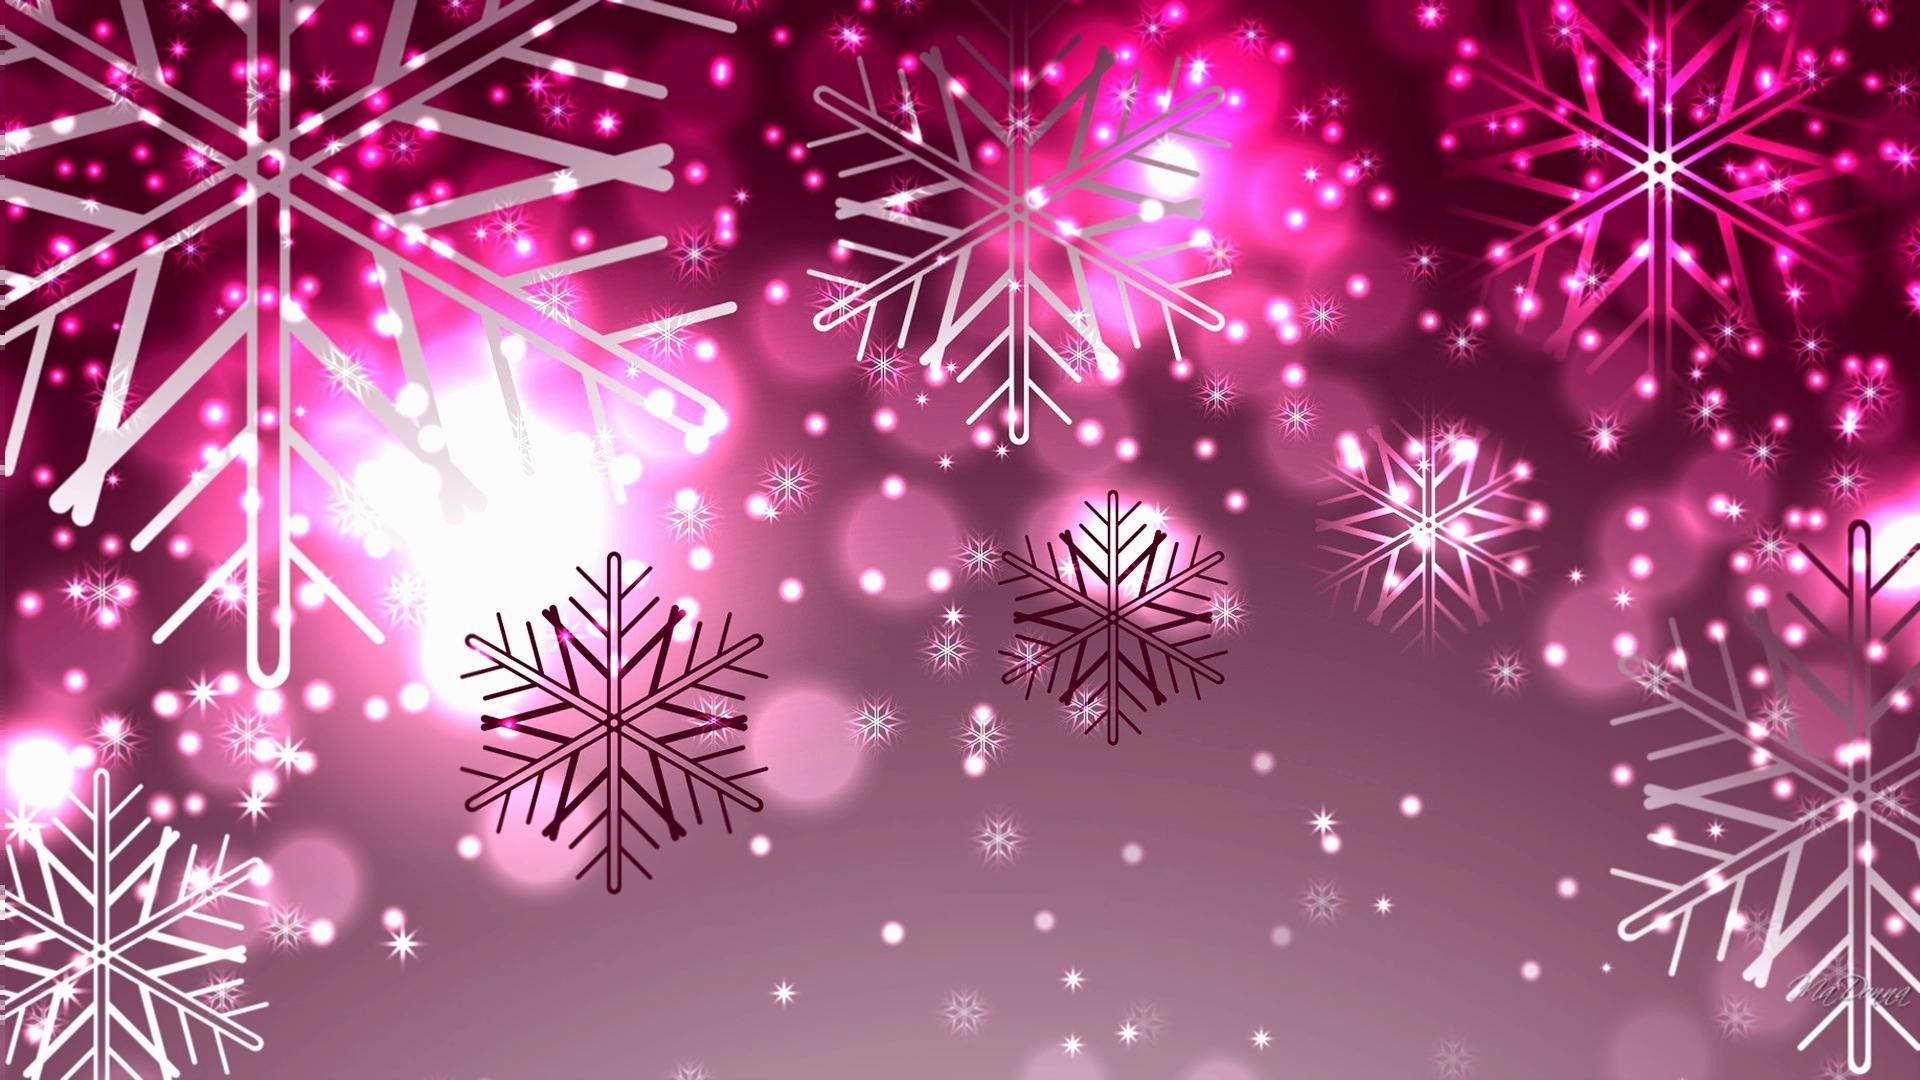 Wallpaper.wiki Pink Glitter Backgrounds Free Download PIC